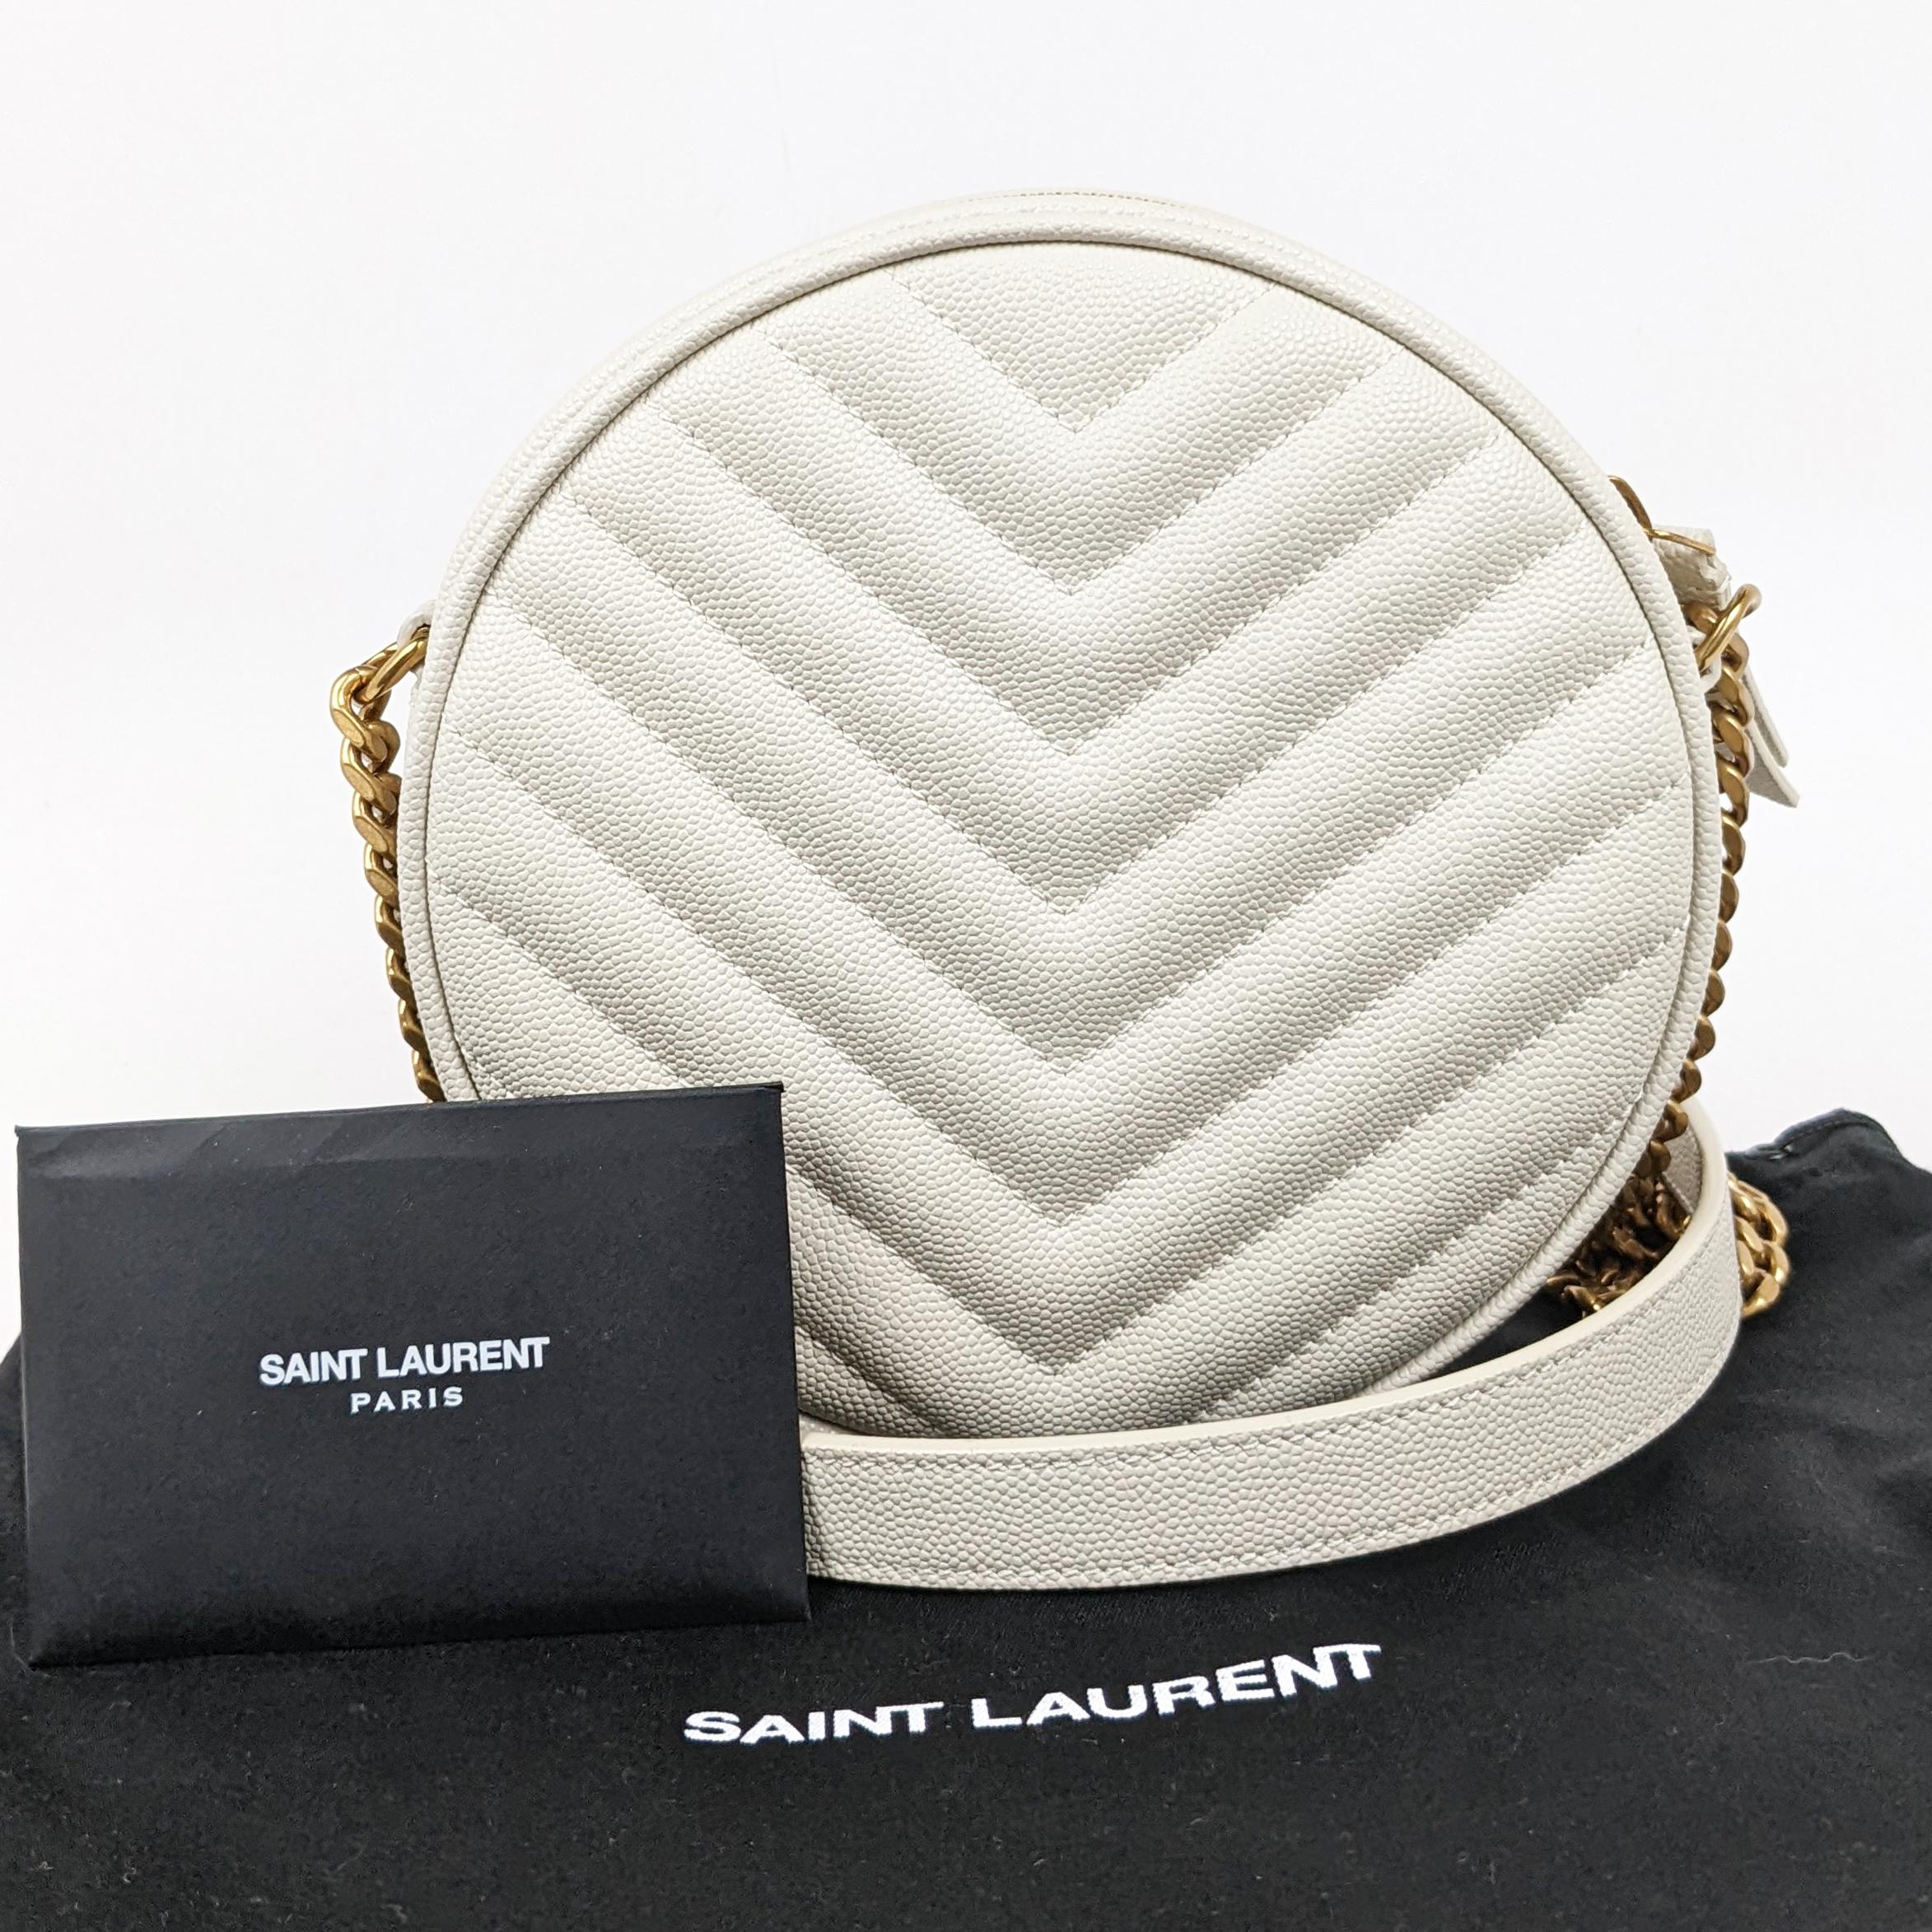 Condition: This authentic Saint Laurent round bag is in excellent pre-loved condition. There are light scratches to the hardware.

Est. Retail: $1500

Includes: Dust bag, cards

Features: Gold hardware, chain strap with leather pad, interior slip